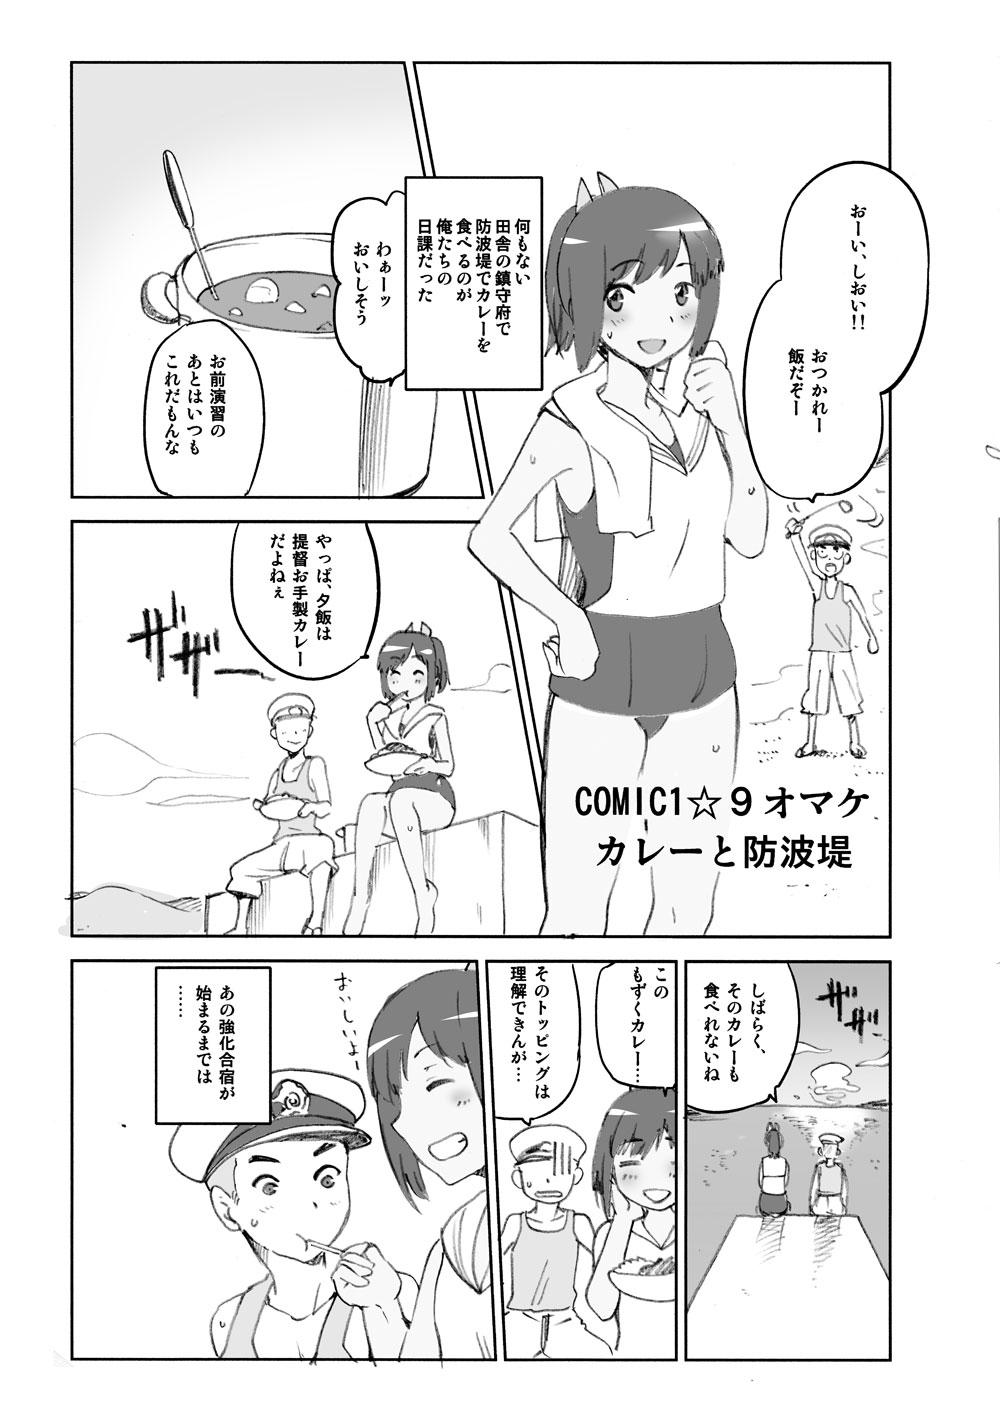 COMIC1☆9 Omake - Curry to Bouhatei 0